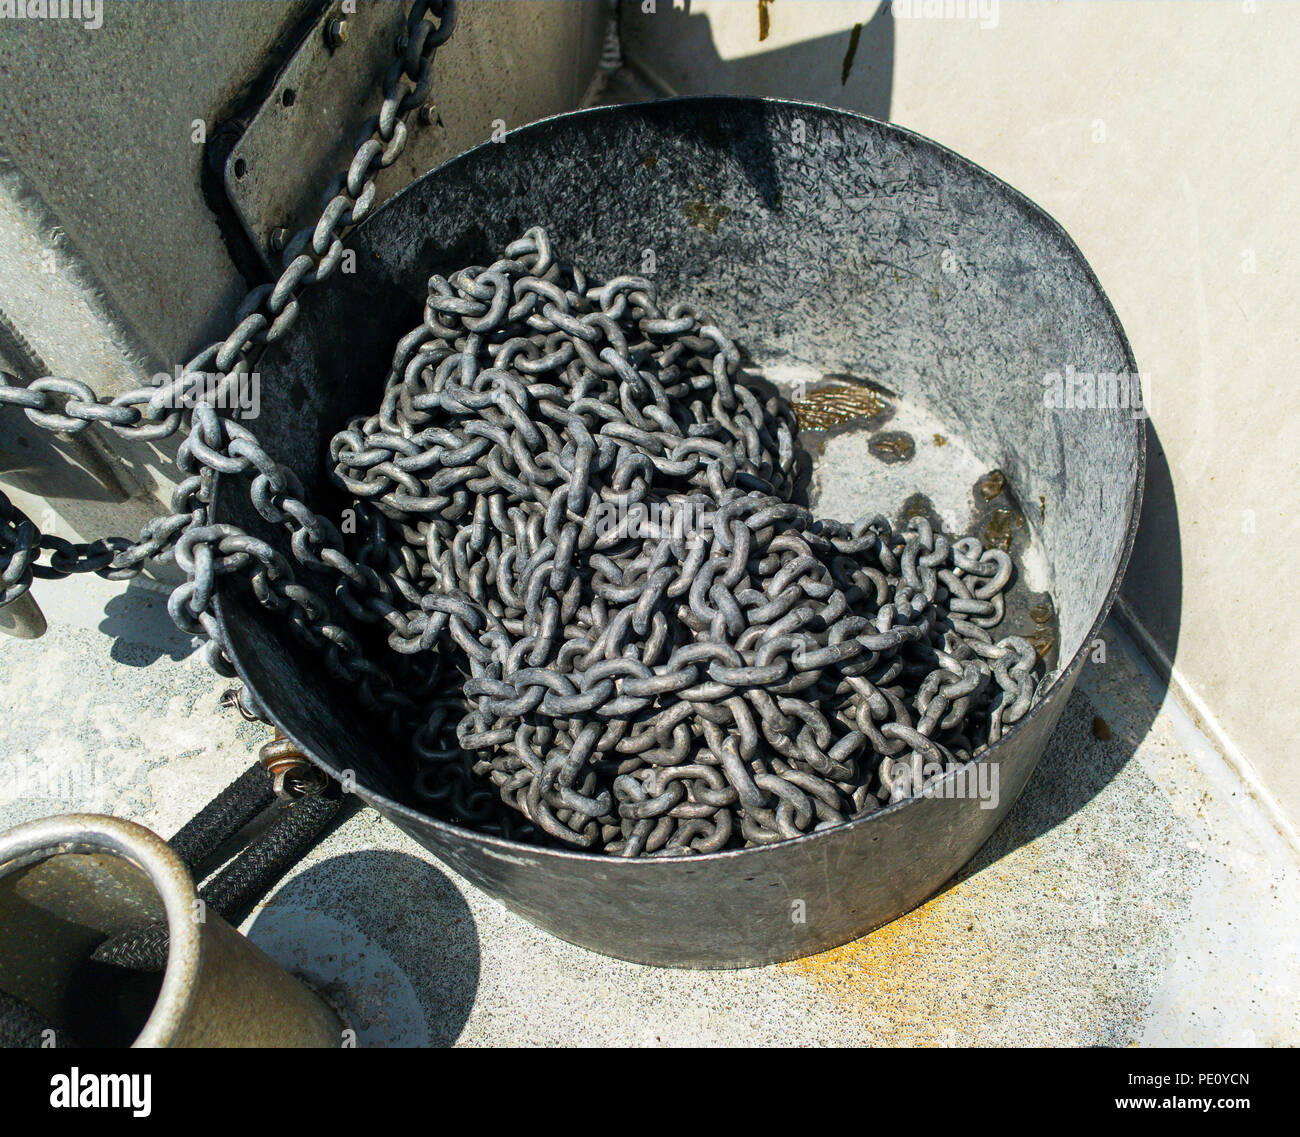 Fisherman boat with anchor chain insider large metal bin container. Silver anchor chain inside large metal container. Stock Photo